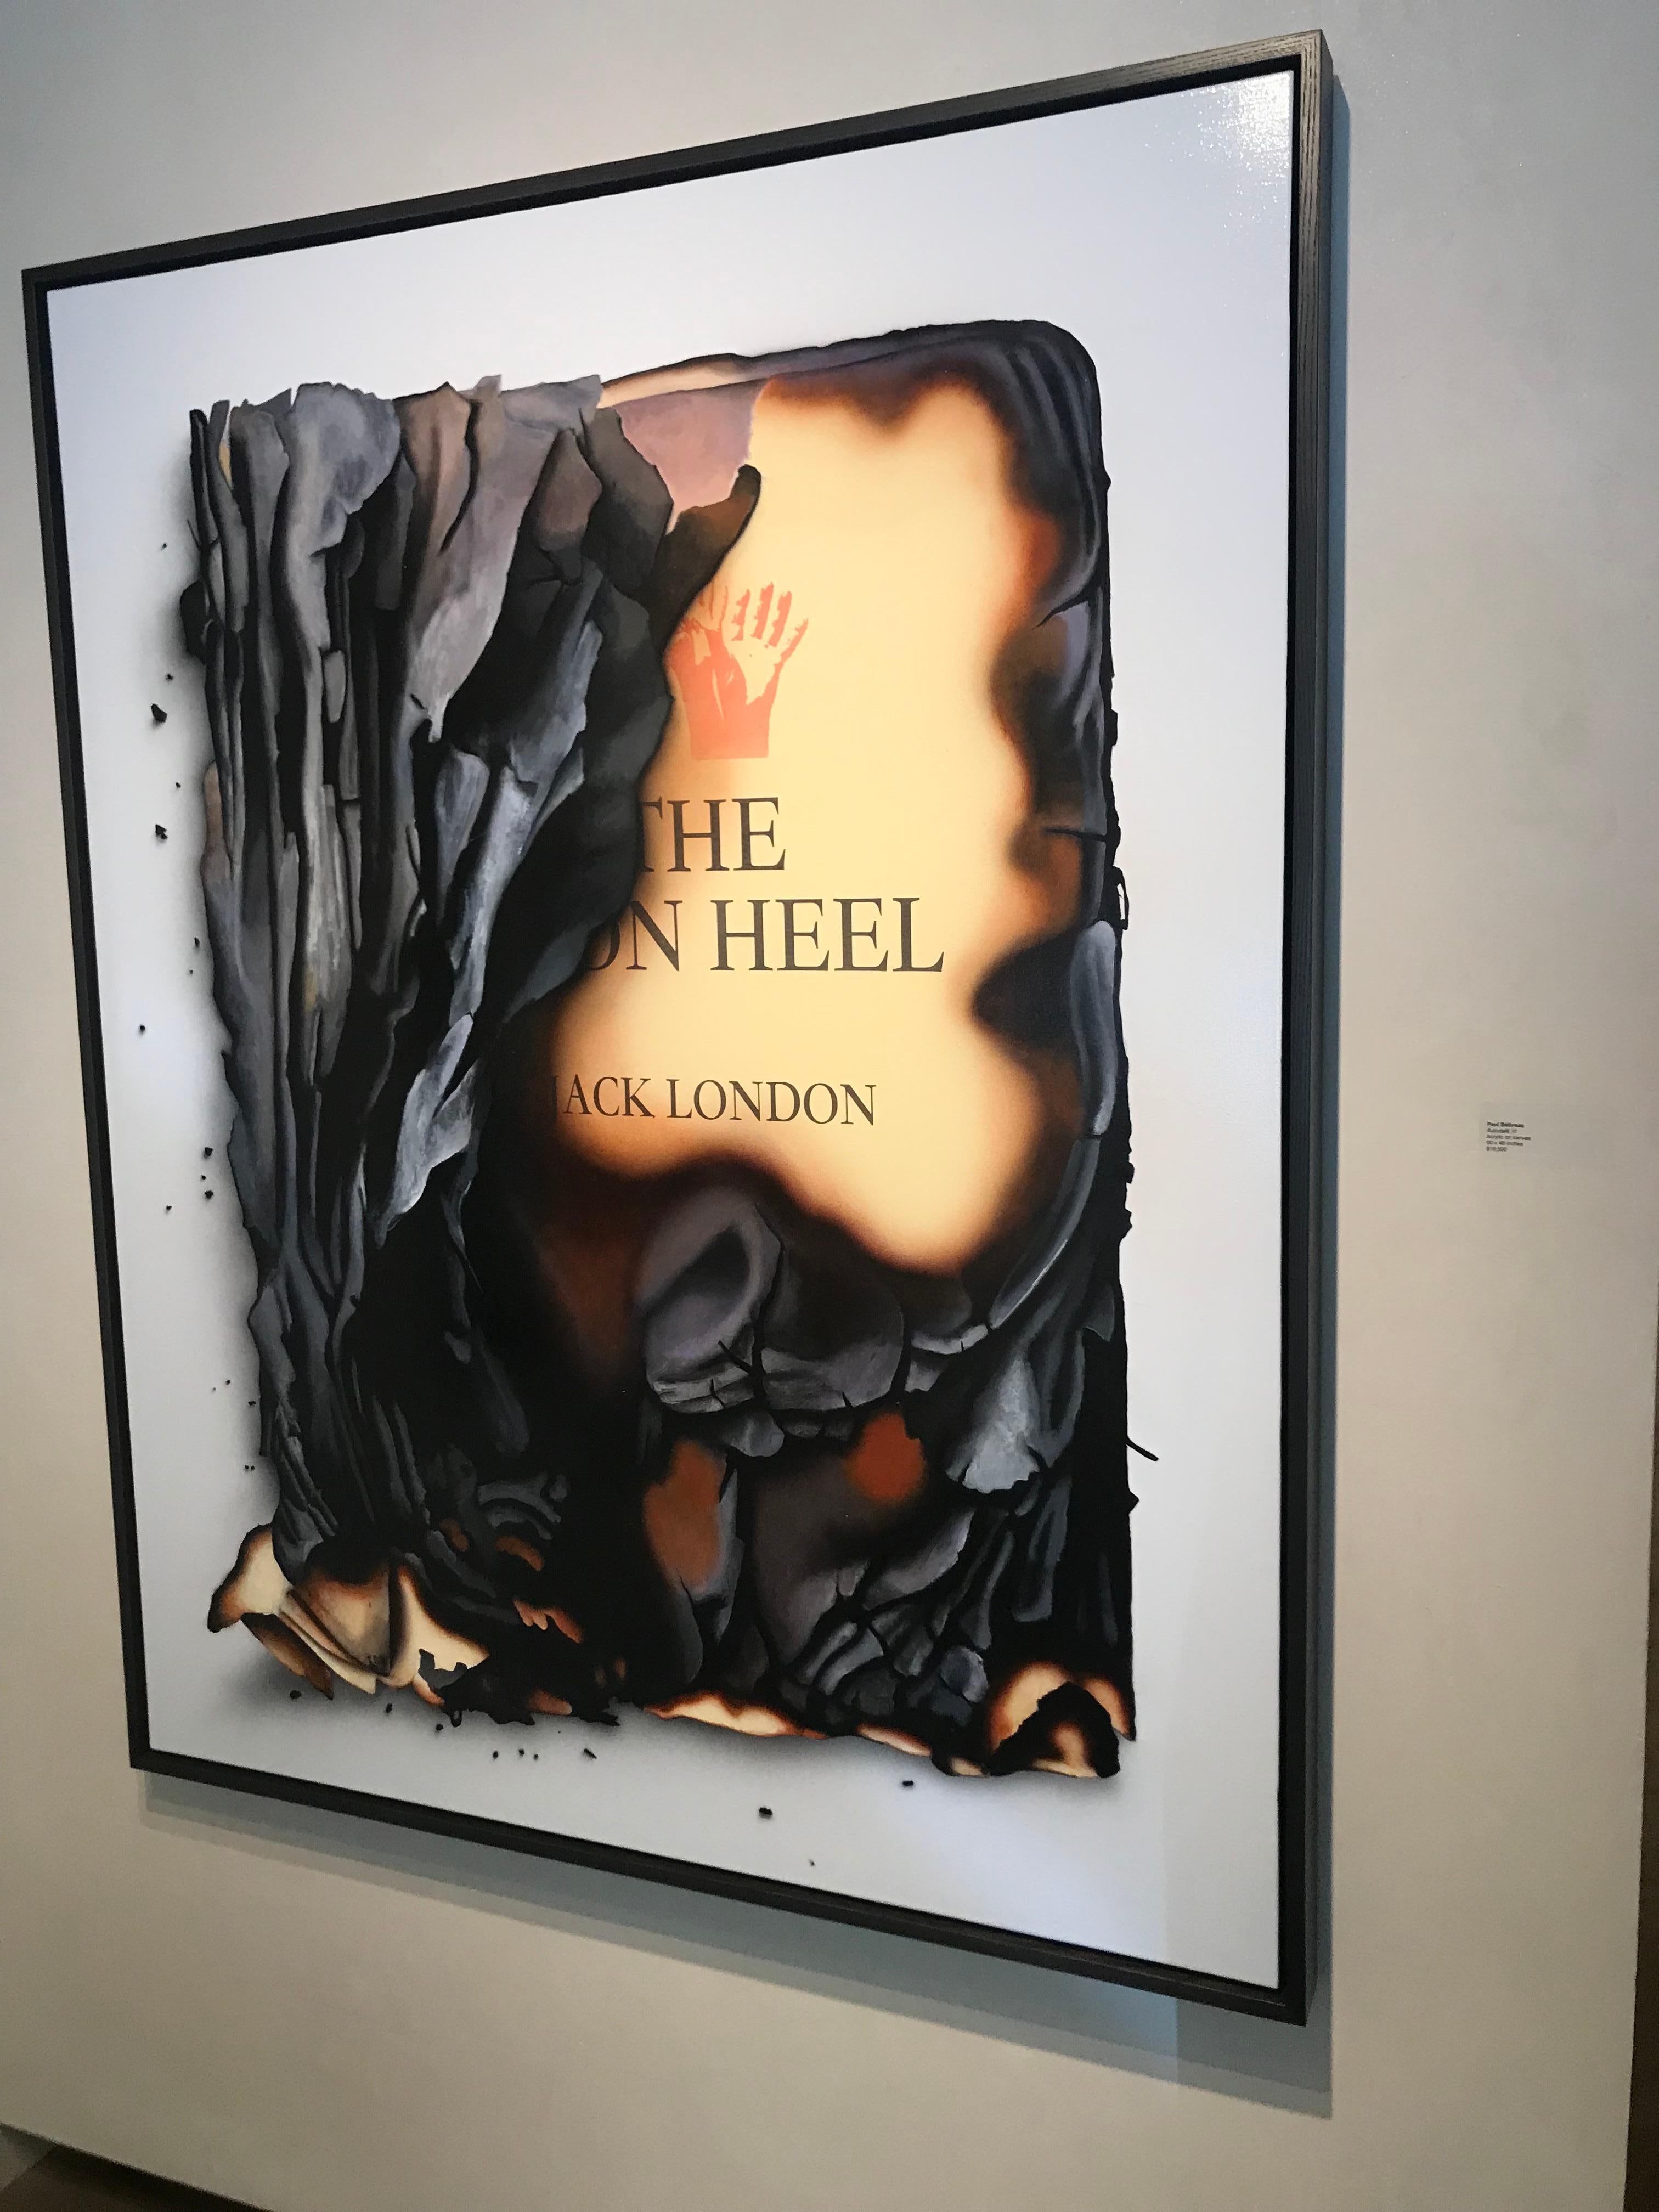 This acrylic painting on canvas by Quebecois painter Paul Béliveau is framed in a black wood float frame and depicts the burnt titled page of Jack London's 